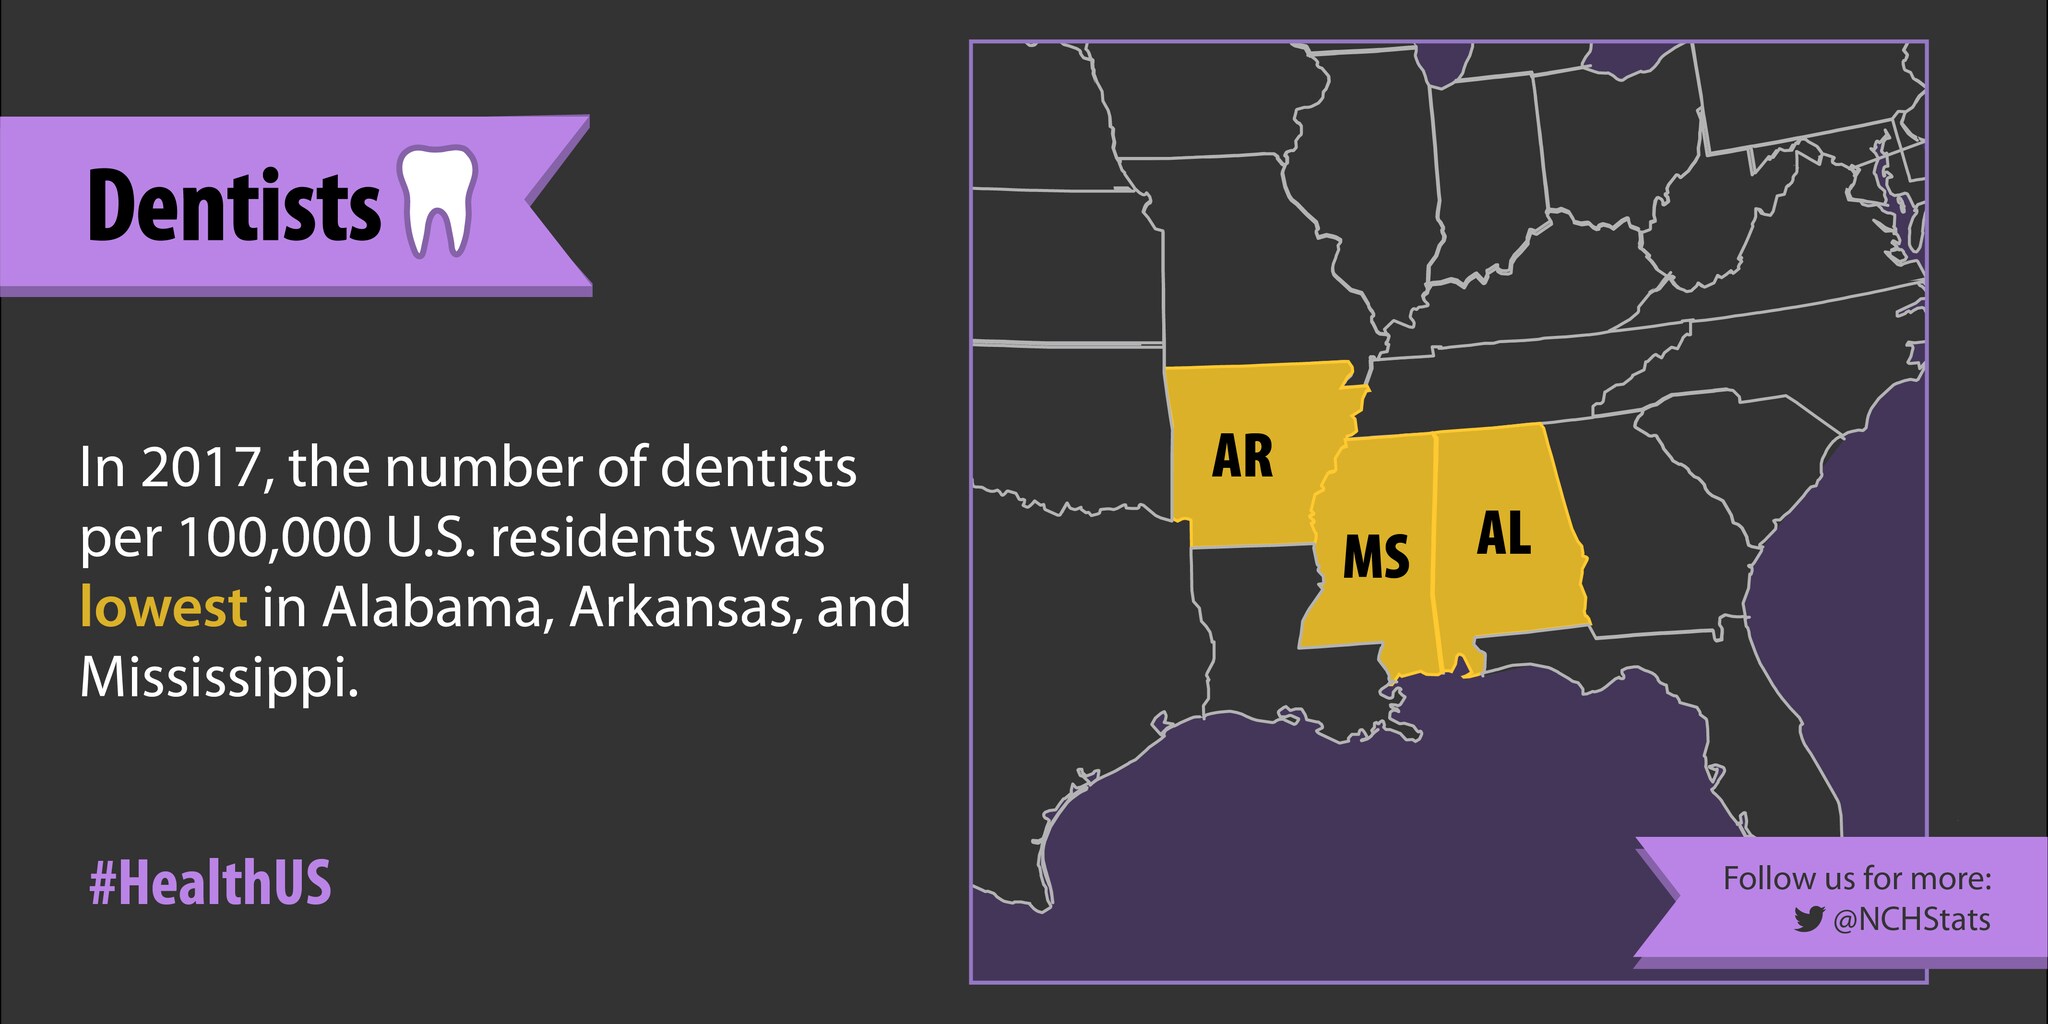 In 2017, the number of dentists per 100,000 U.S. residents was lowest in Alabama, Arkansas, and Mississippi.